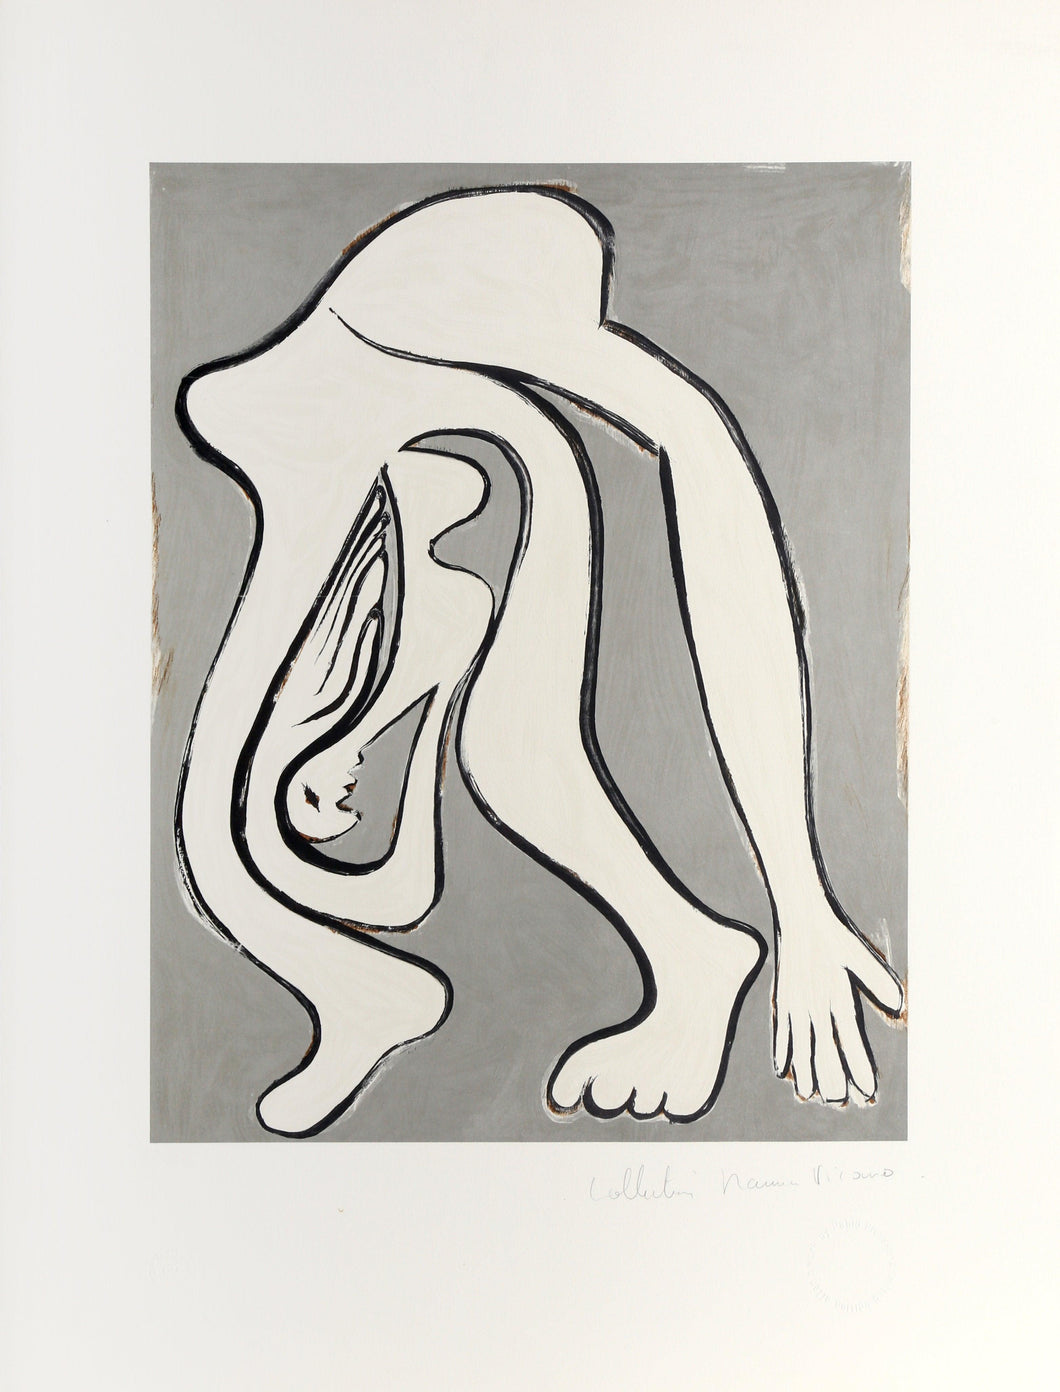 Femme Acrobate Lithograph | Pablo Picasso,{{product.type}}